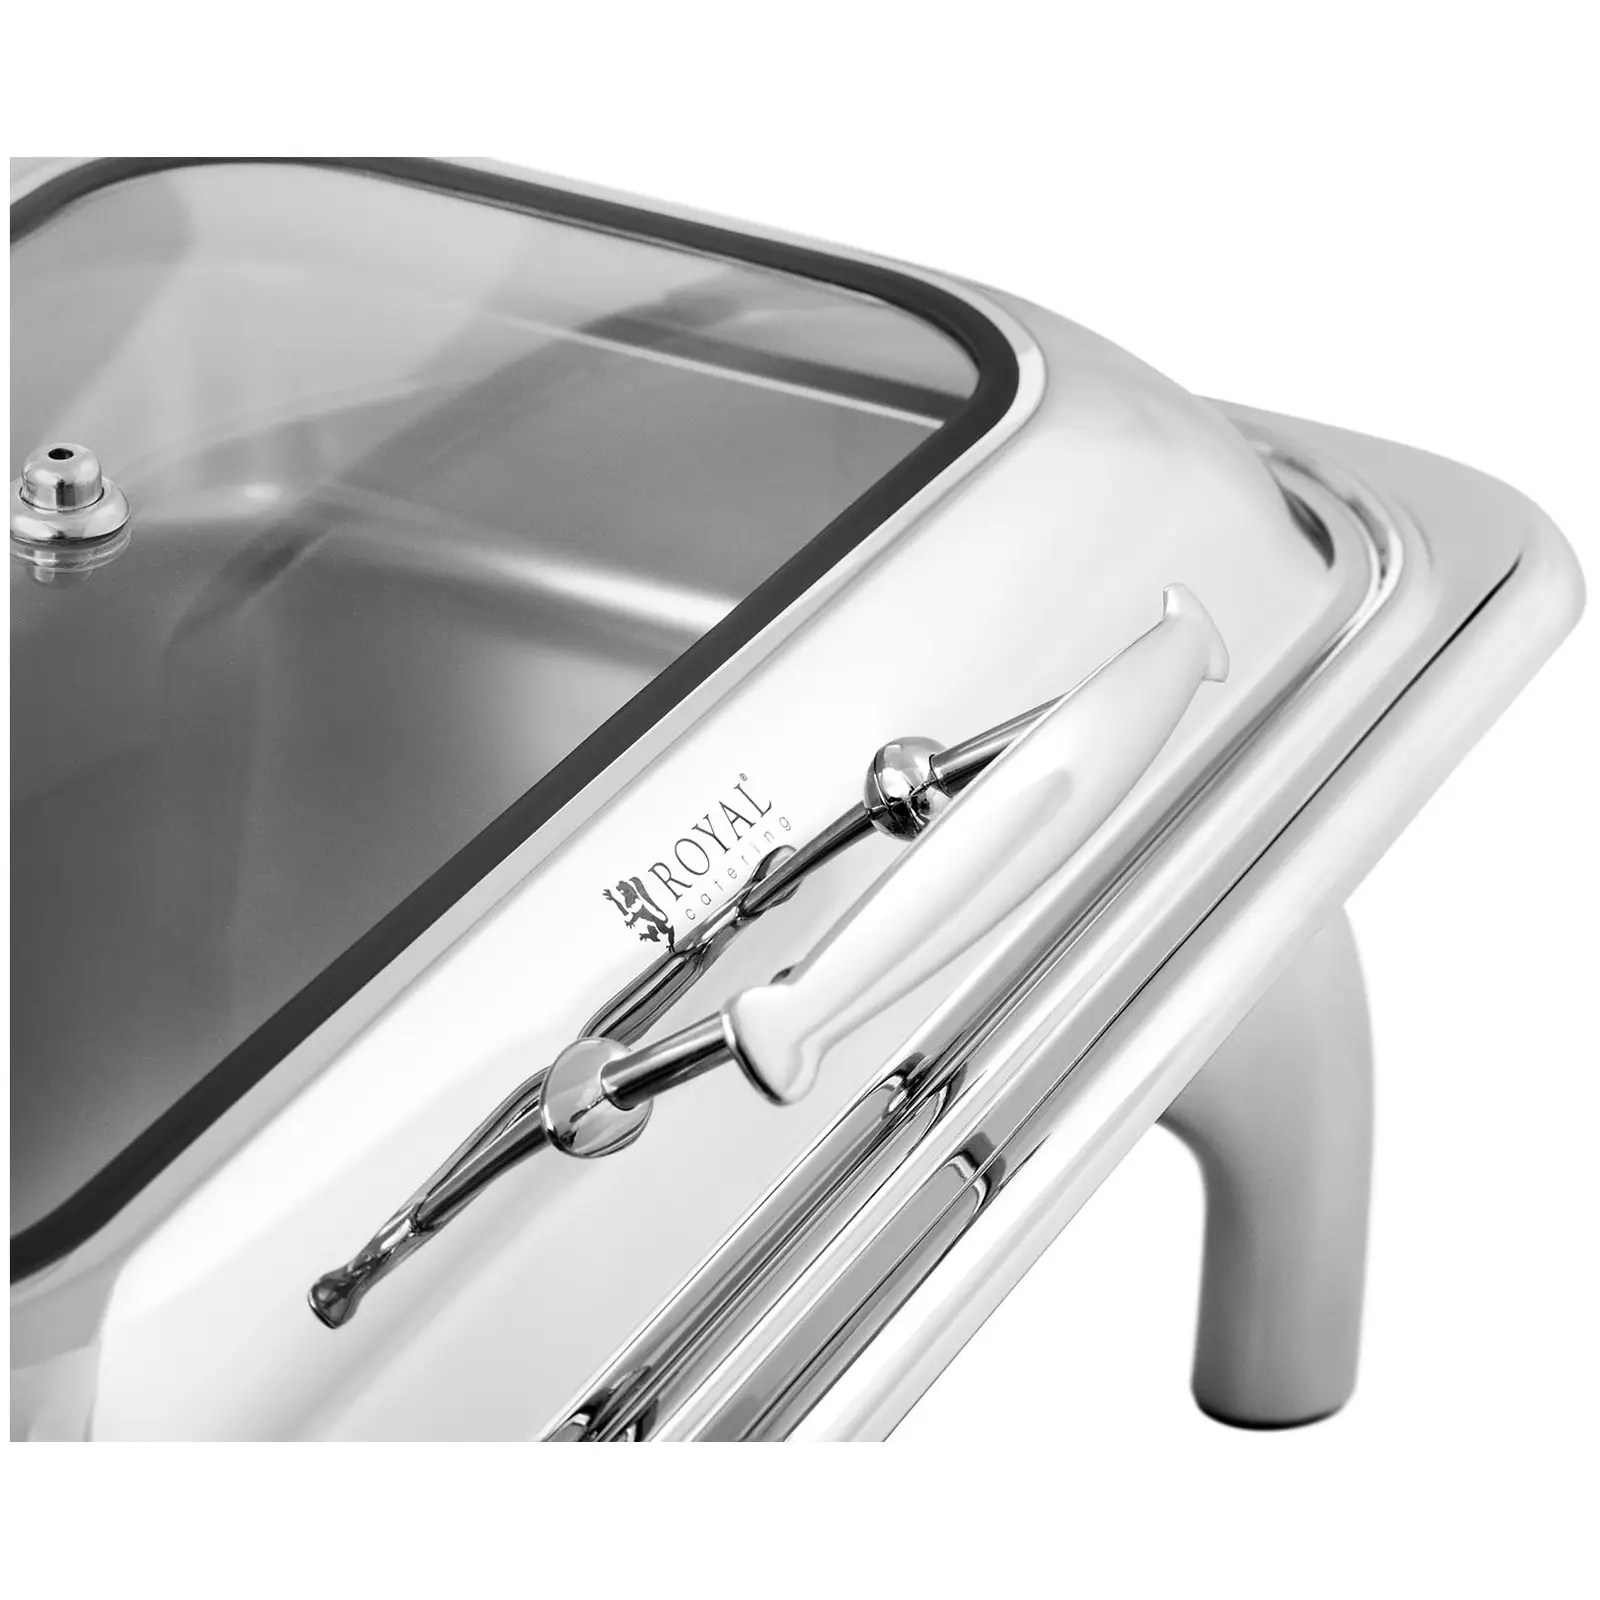 Chafing Dish - GN 1/1 - Royal Catering - 8.5 L - 2 brenncelle